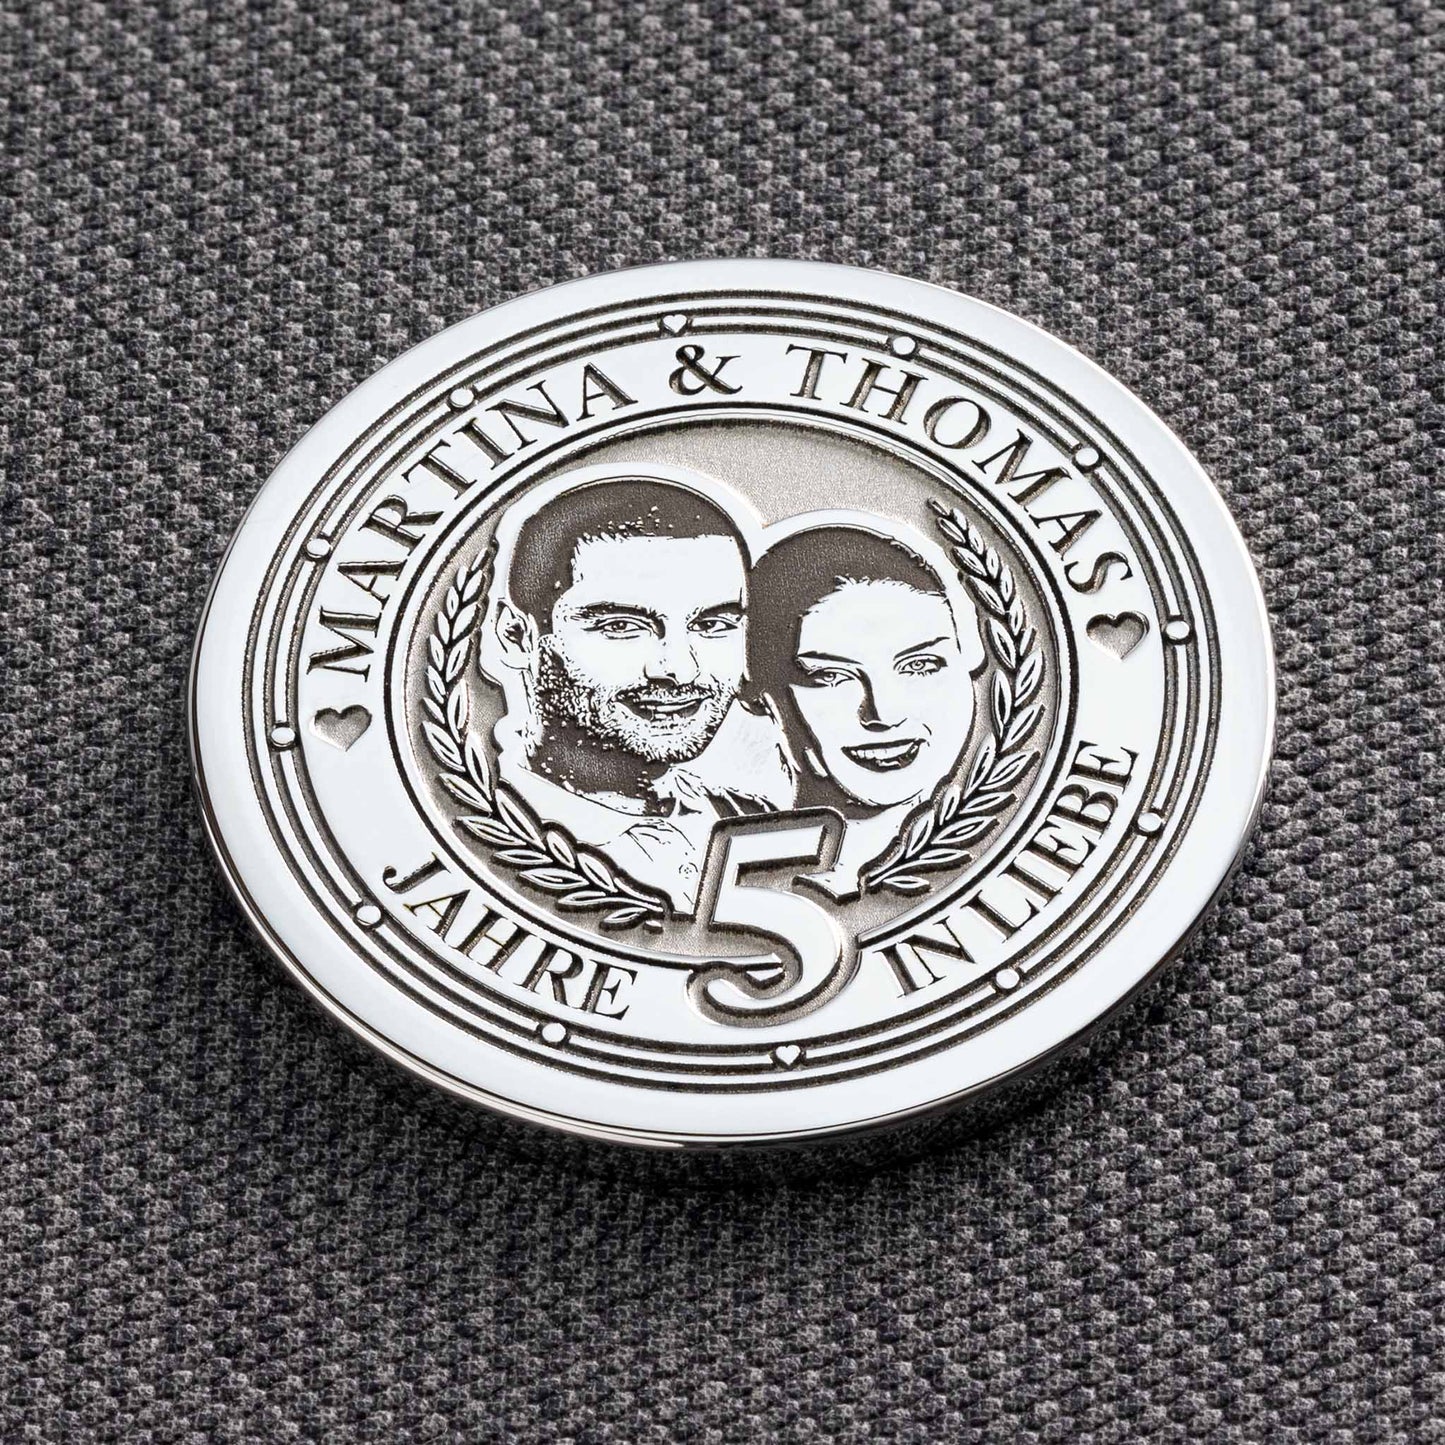 Unique 5 Year Wedding Anniversary Gift: Personalised Anniversary Coin - seQua.Shop